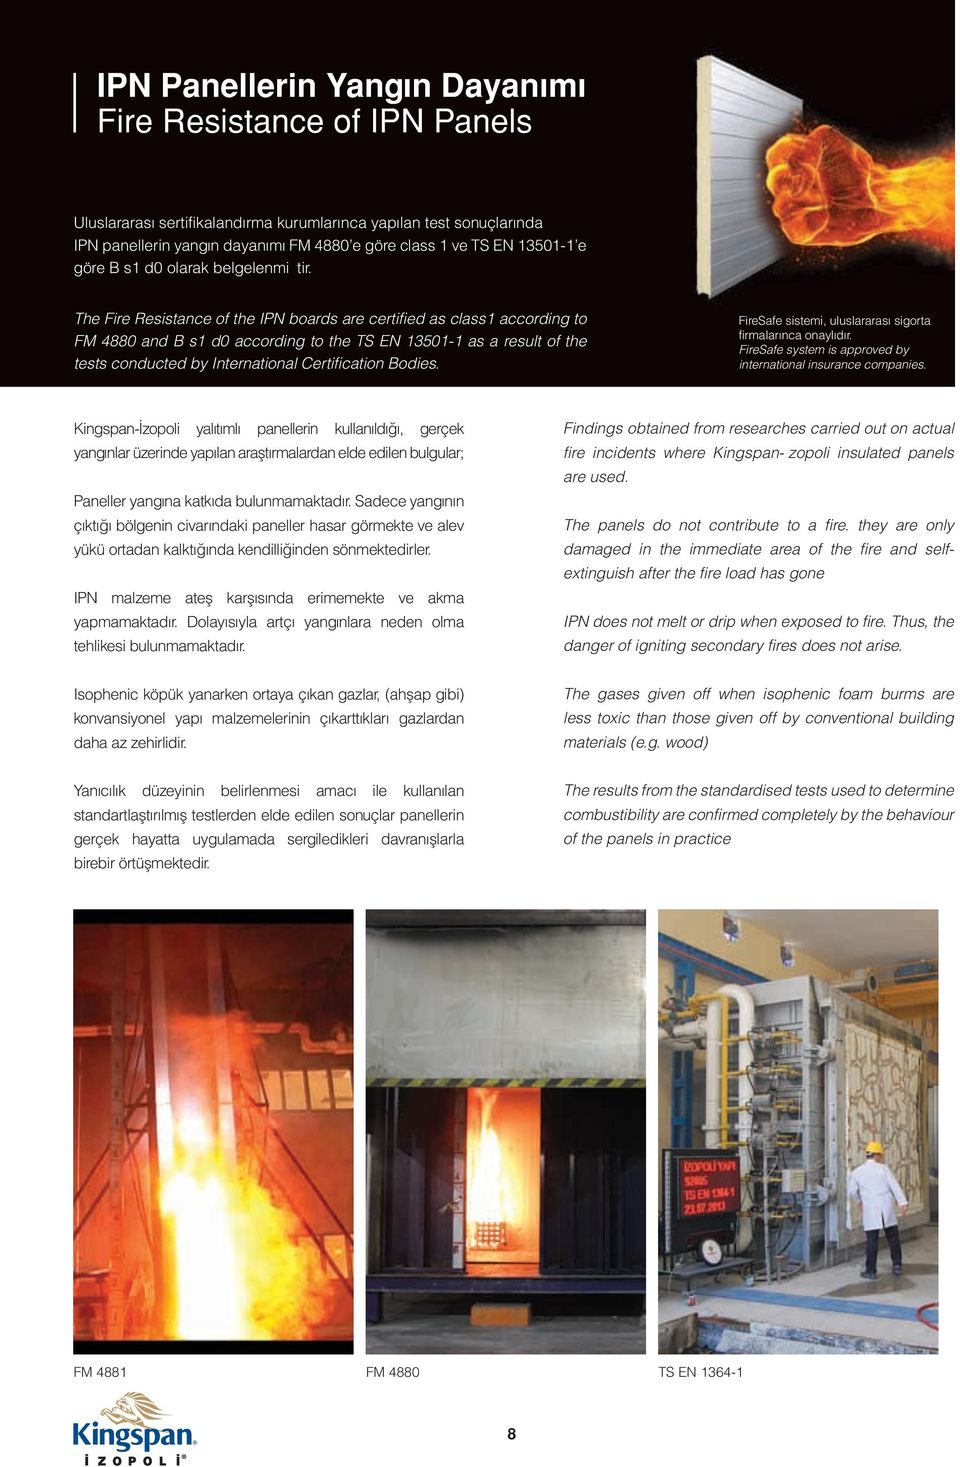 The Fire Resistance of the IPN boards are certified as class1 according to FM 4880 and B s1 d0 according to the TS EN 13501-1 as a result of the tests conducted by International Certification Bodies.